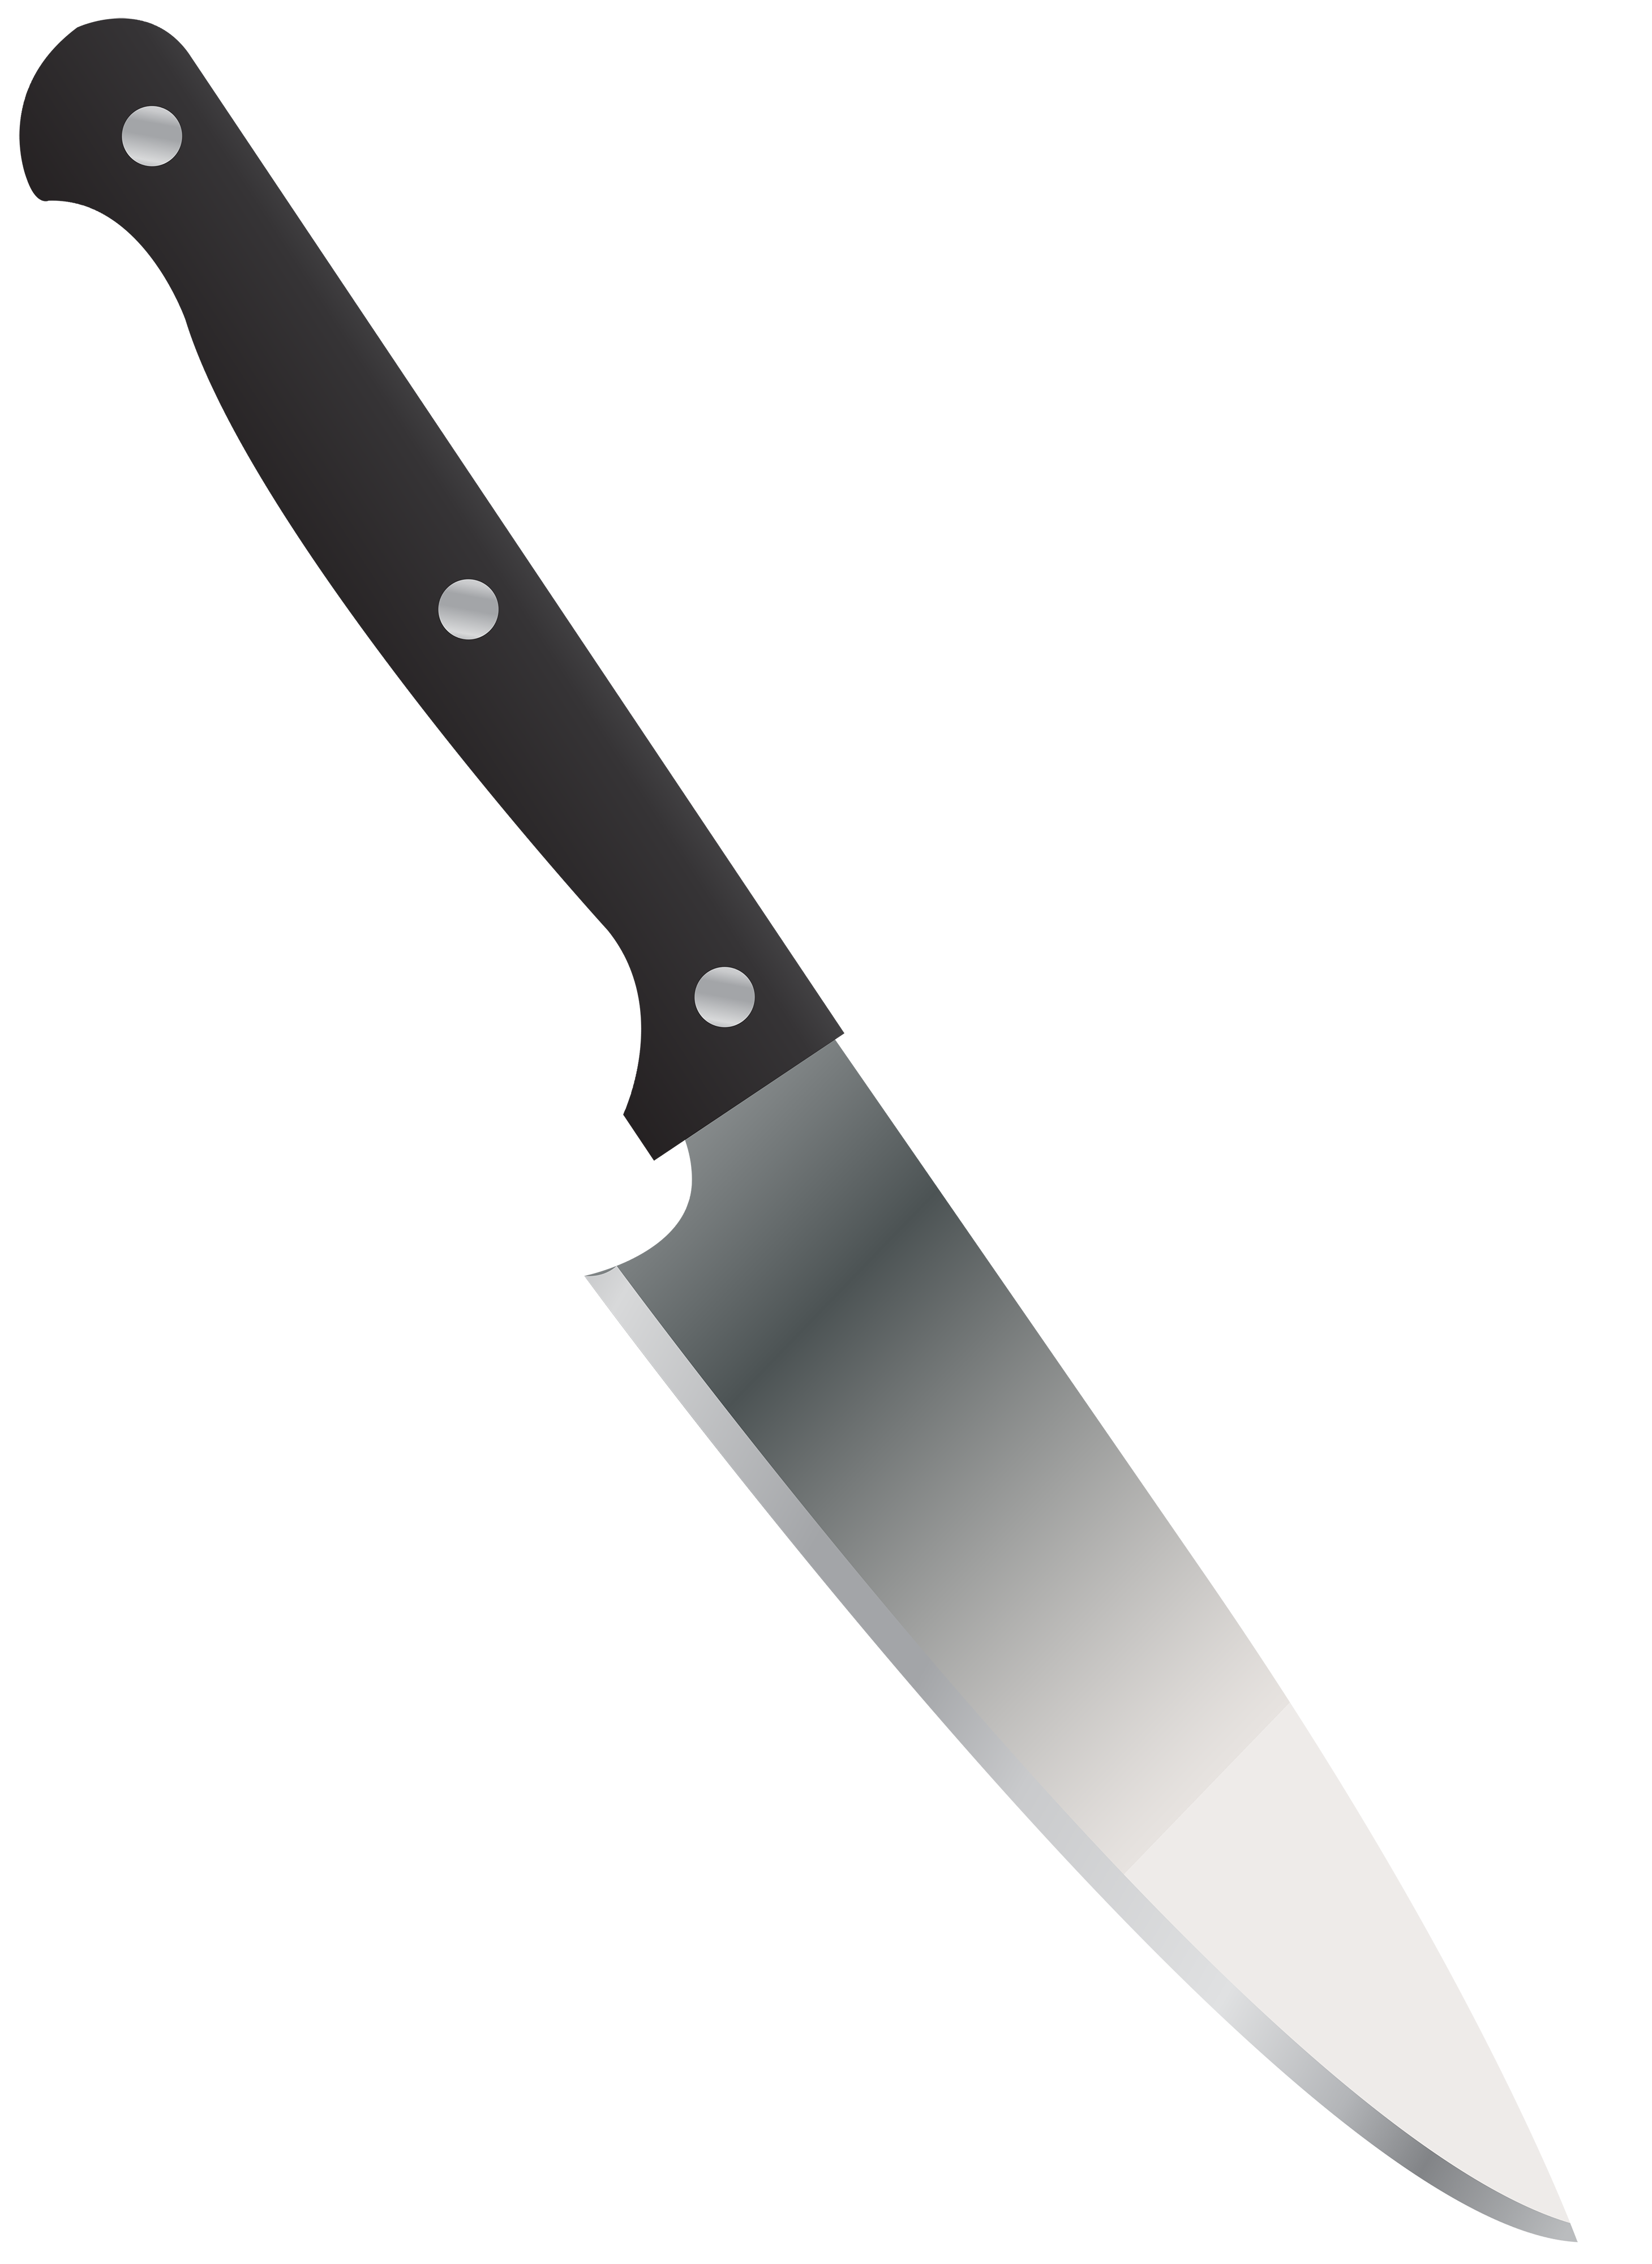 Clipart roses knife. Kitchen png image clip